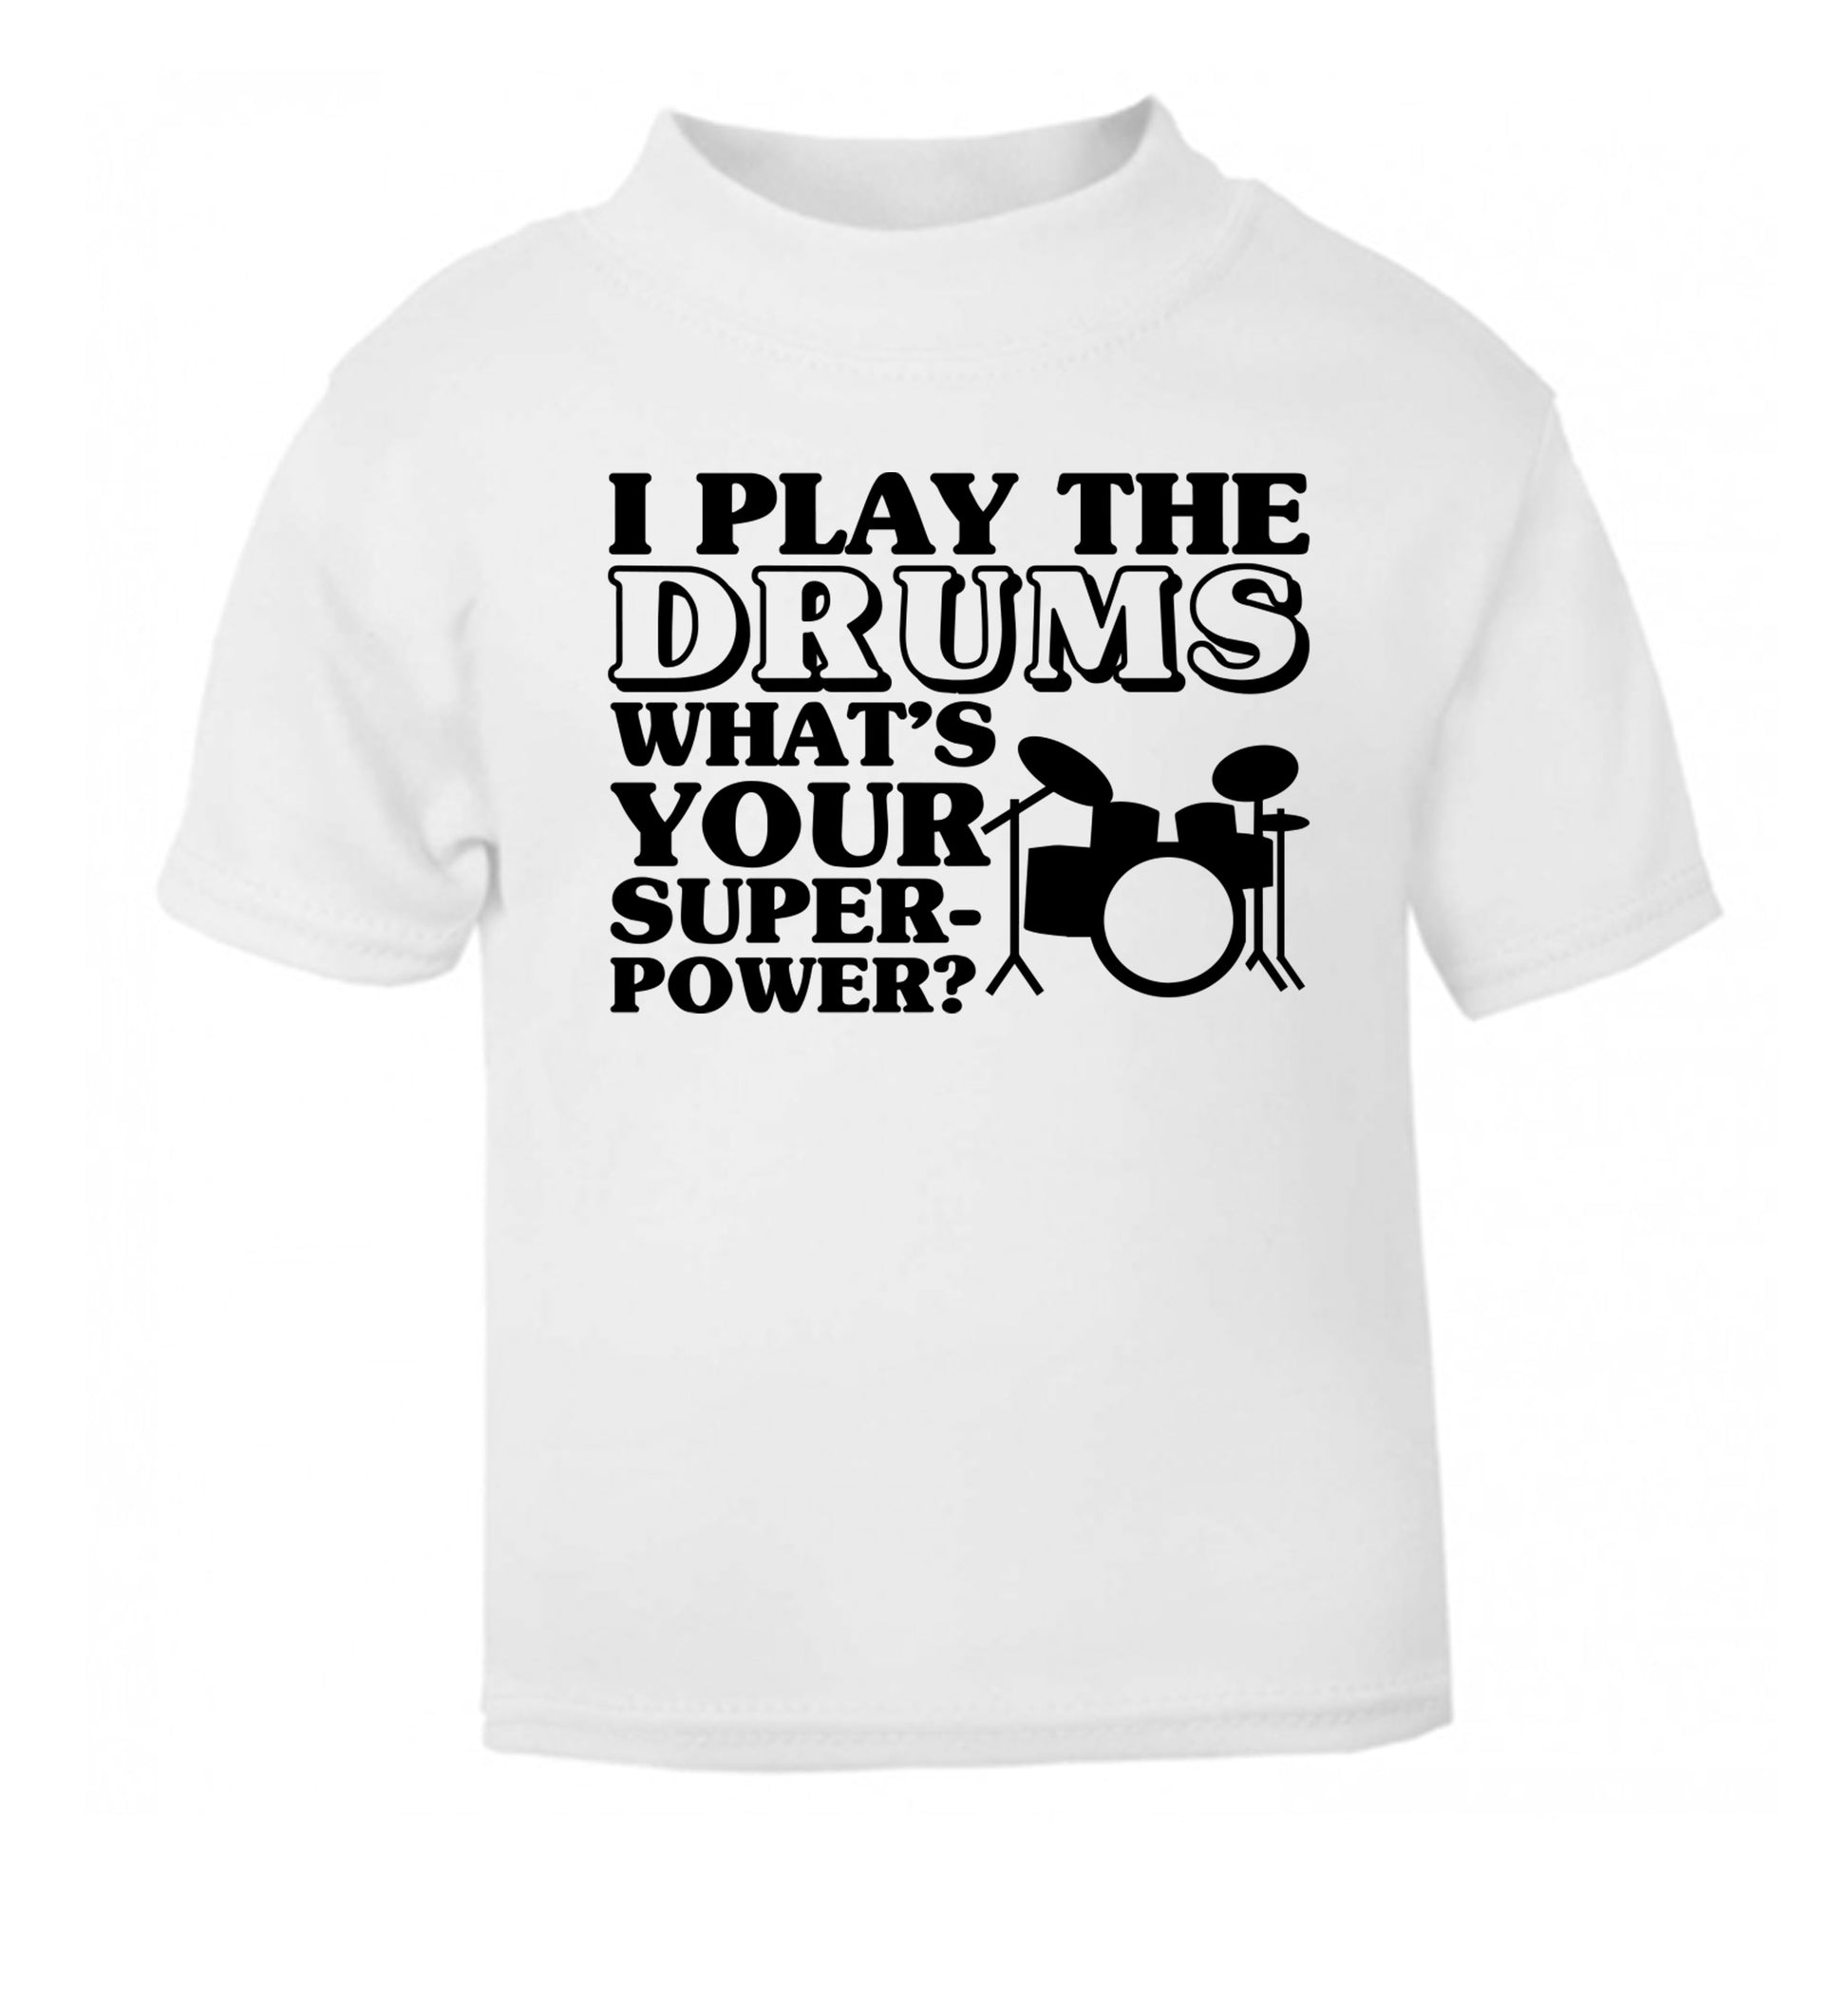 I play the drums what's your superpower? white Baby Toddler Tshirt 2 Years